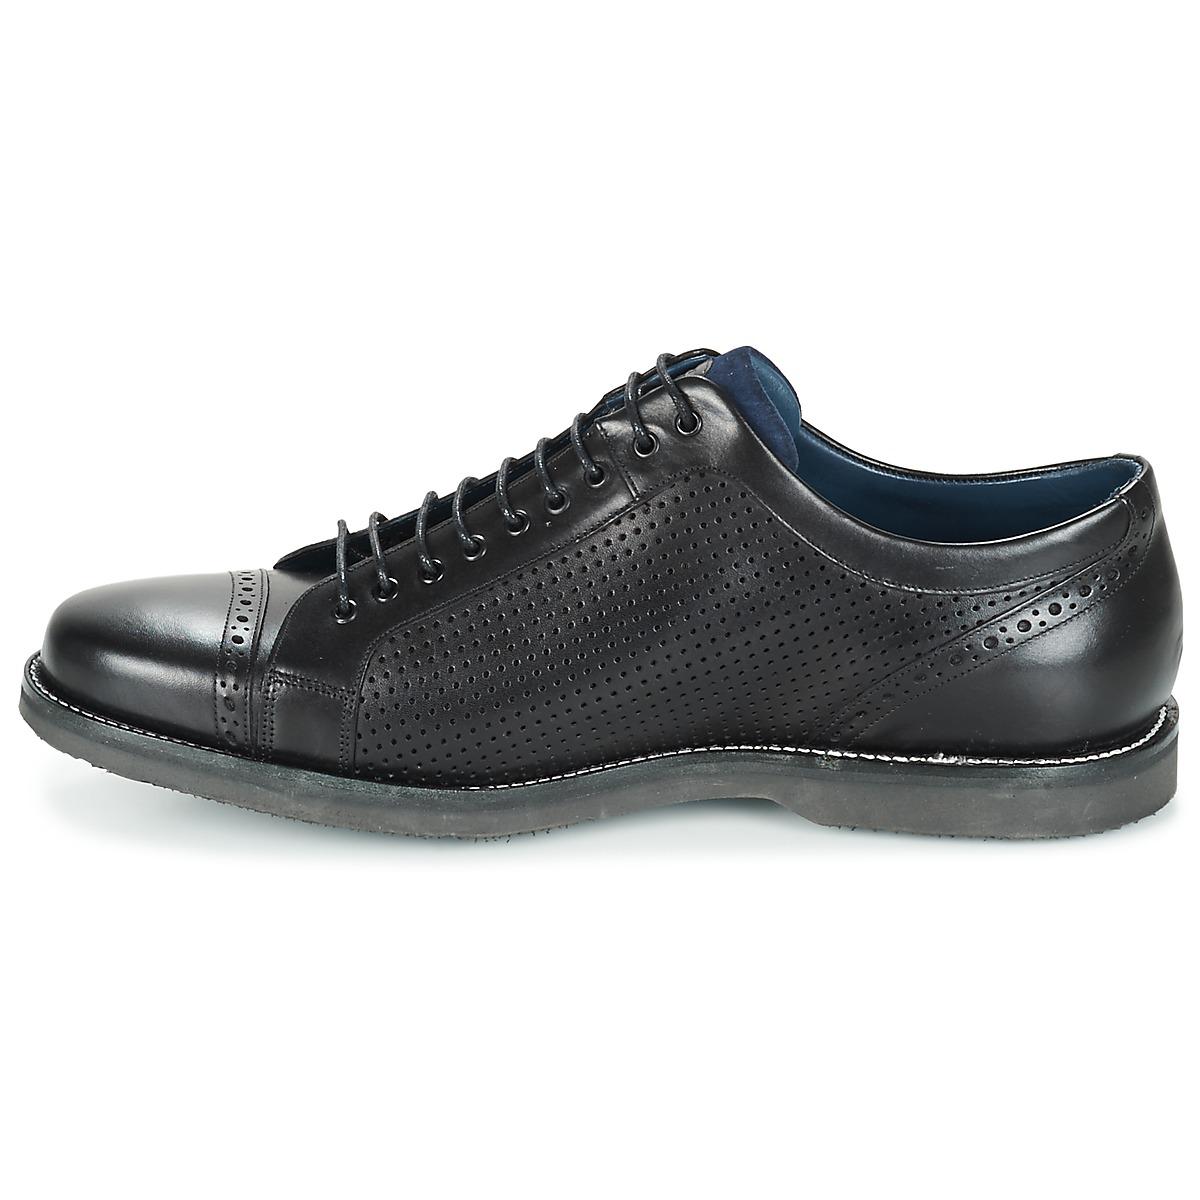 Barker Leather Miami Men's Casual Shoes 